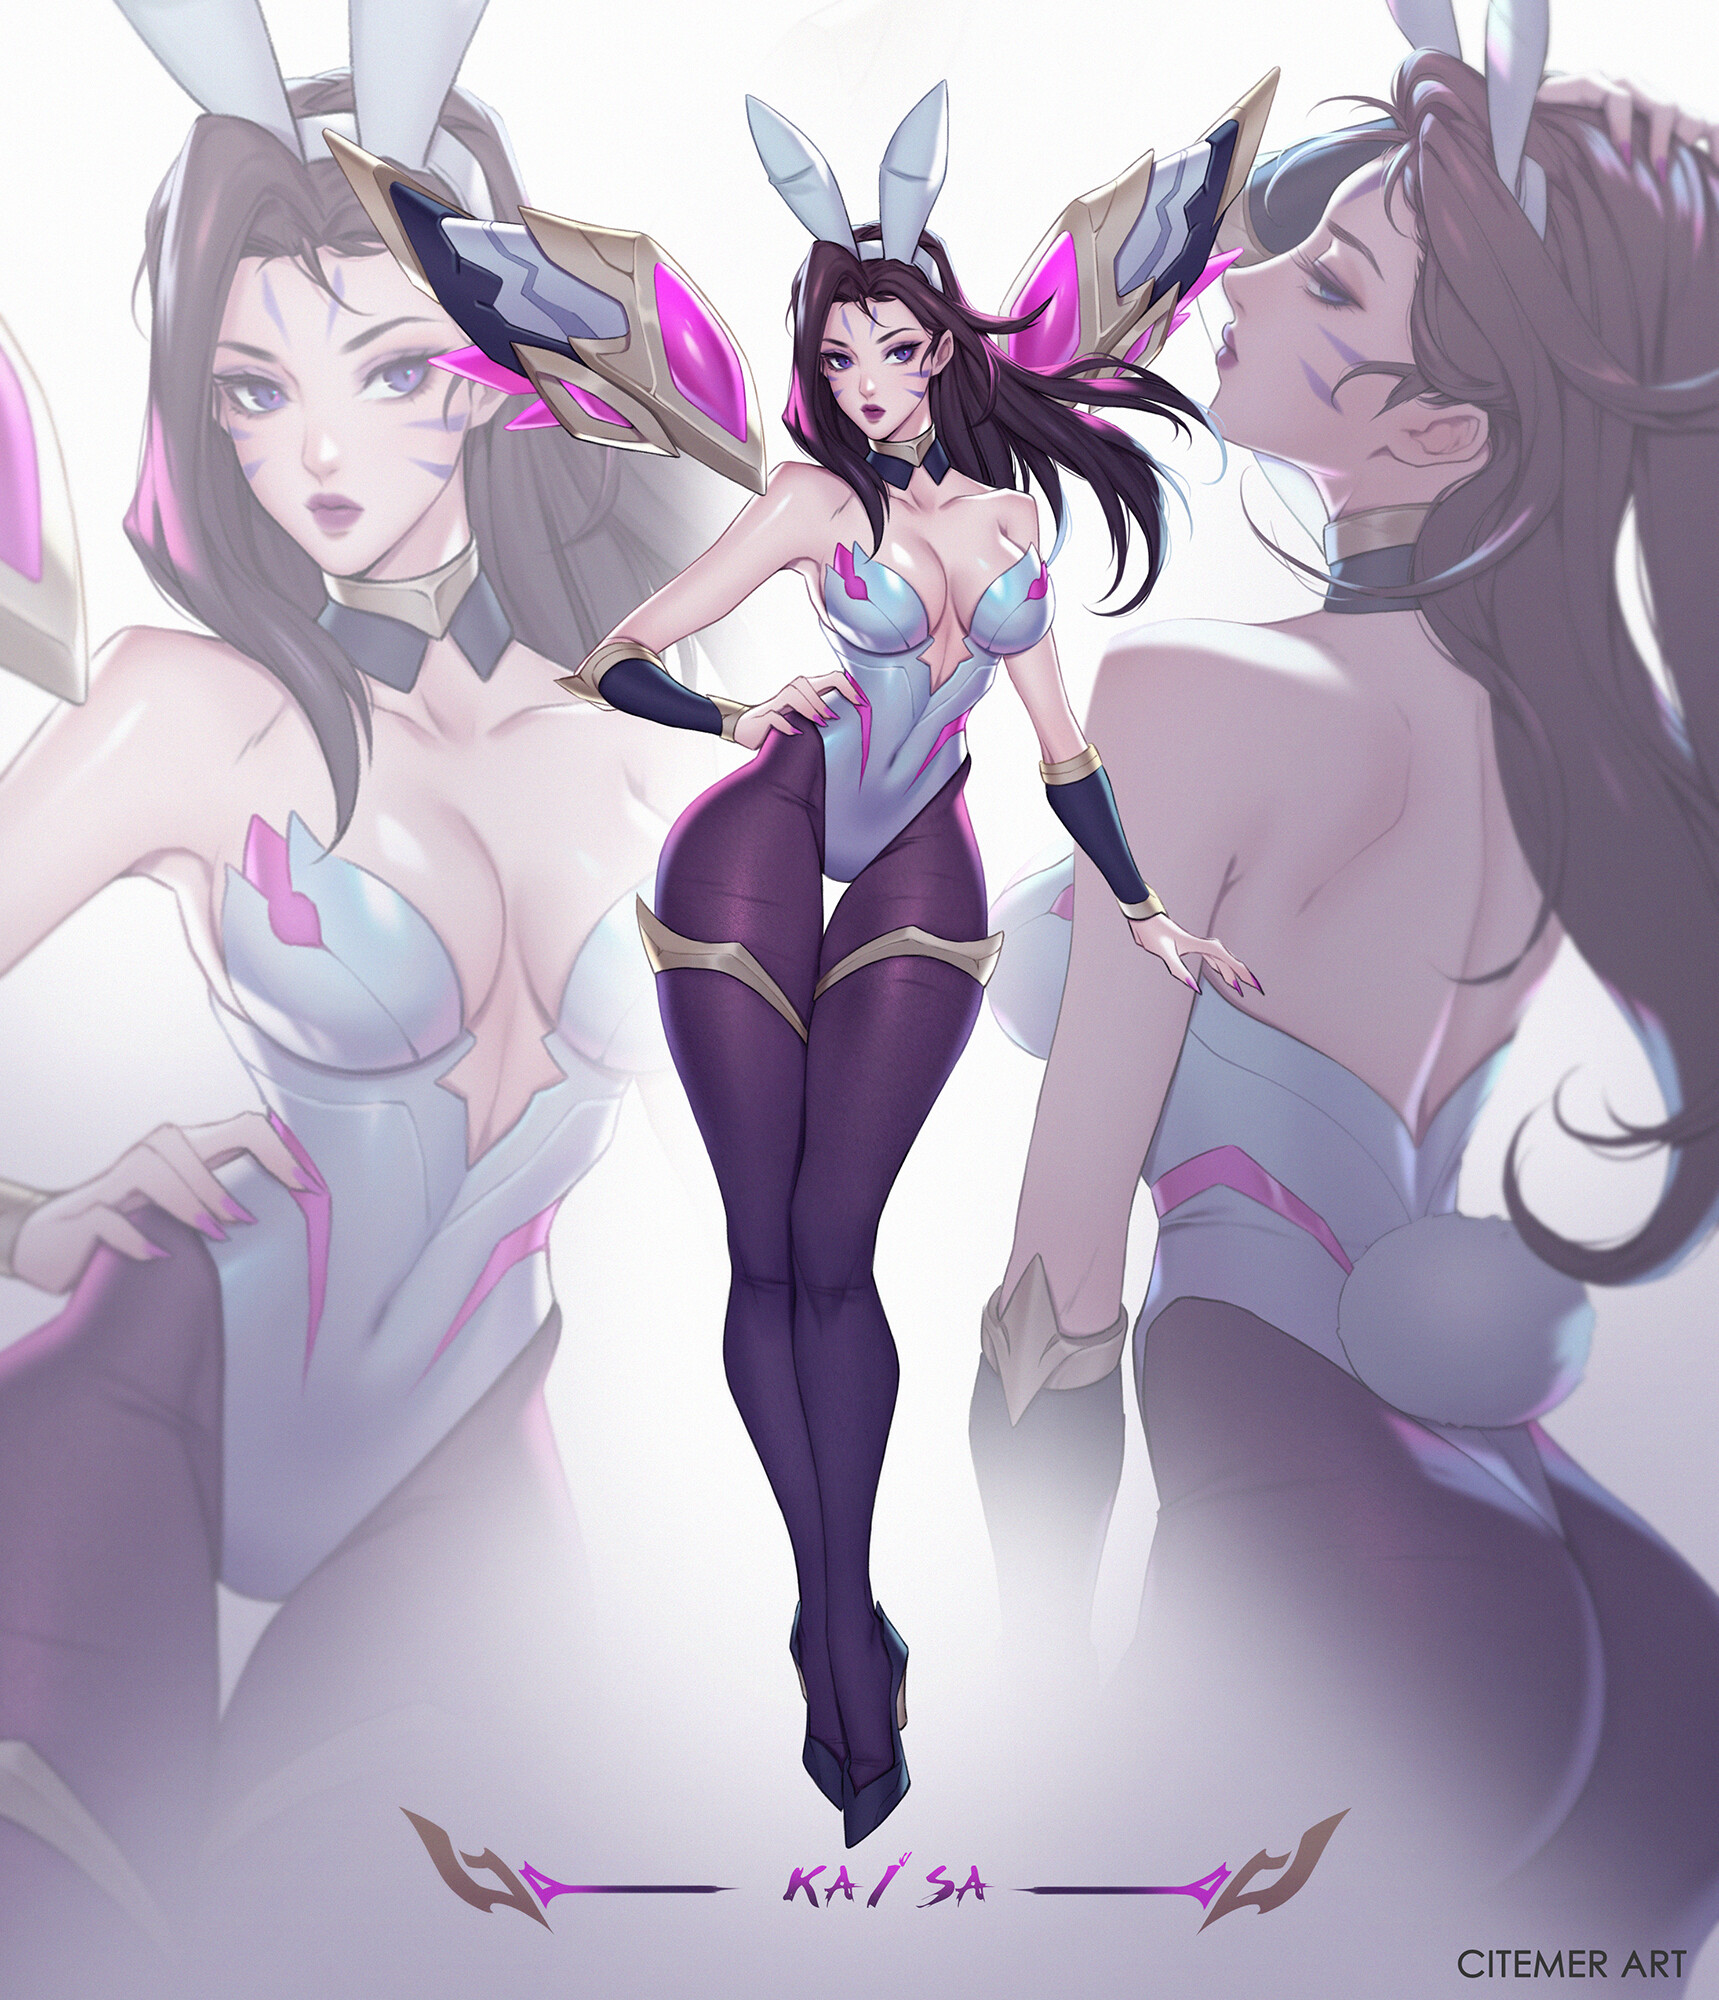 General 1719x2000 Citemer Liu drawing League of Legends women cleavage the gap white bunny ears bunny girl Kai'Sa (League of Legends) digital art watermarked portrait display